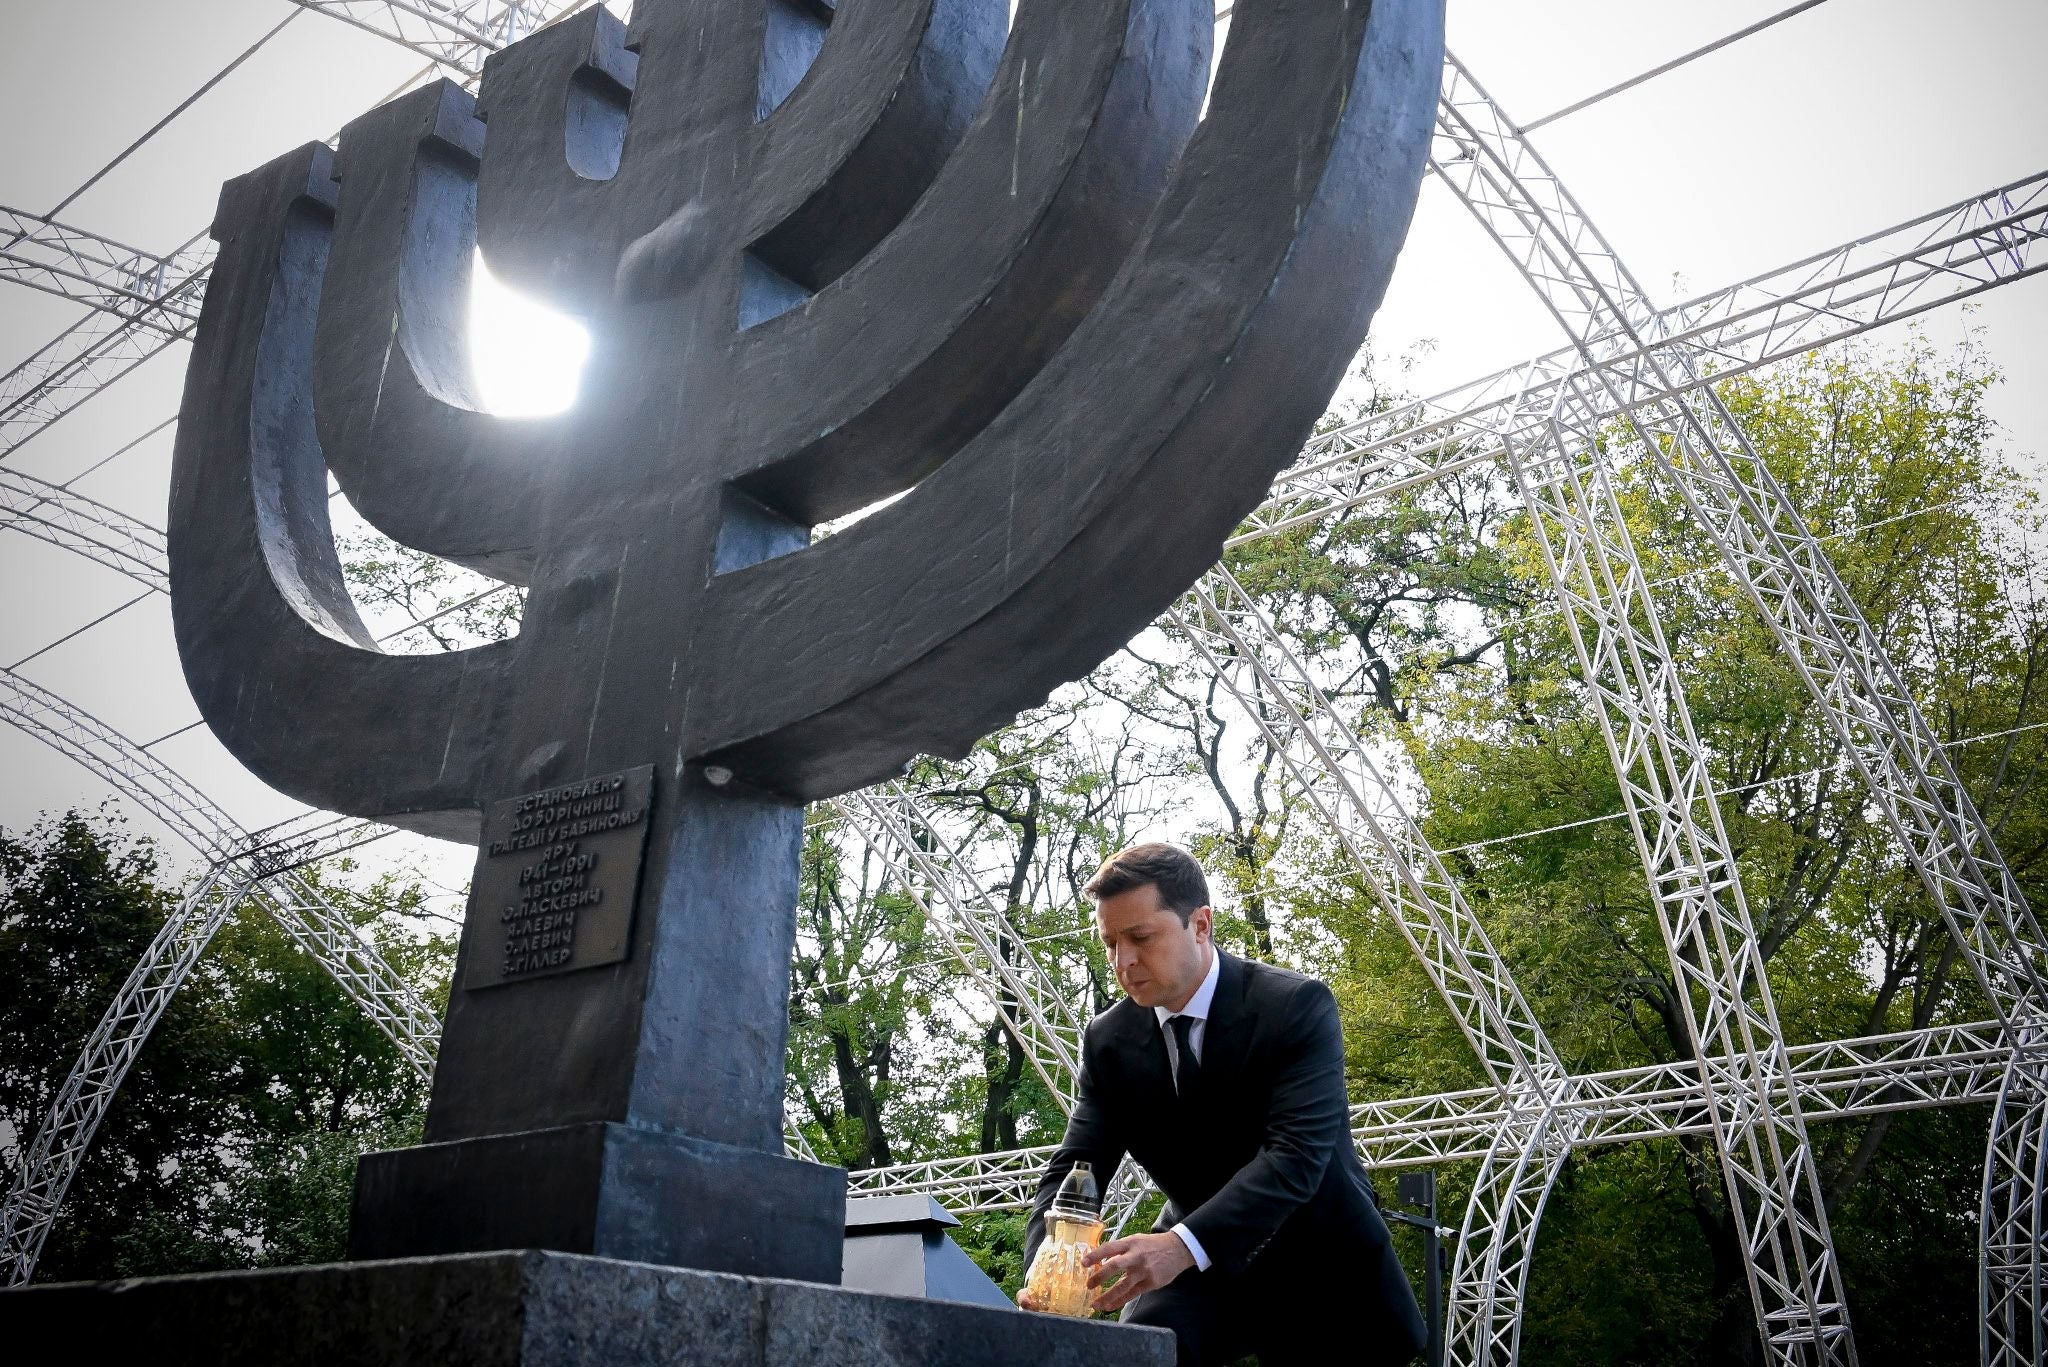 Ukraine president Volodymyr Zelensky laying down a lamp at the Minora memorial in Kiev, to mark the 80th anniversary of the Babi Yar massacre